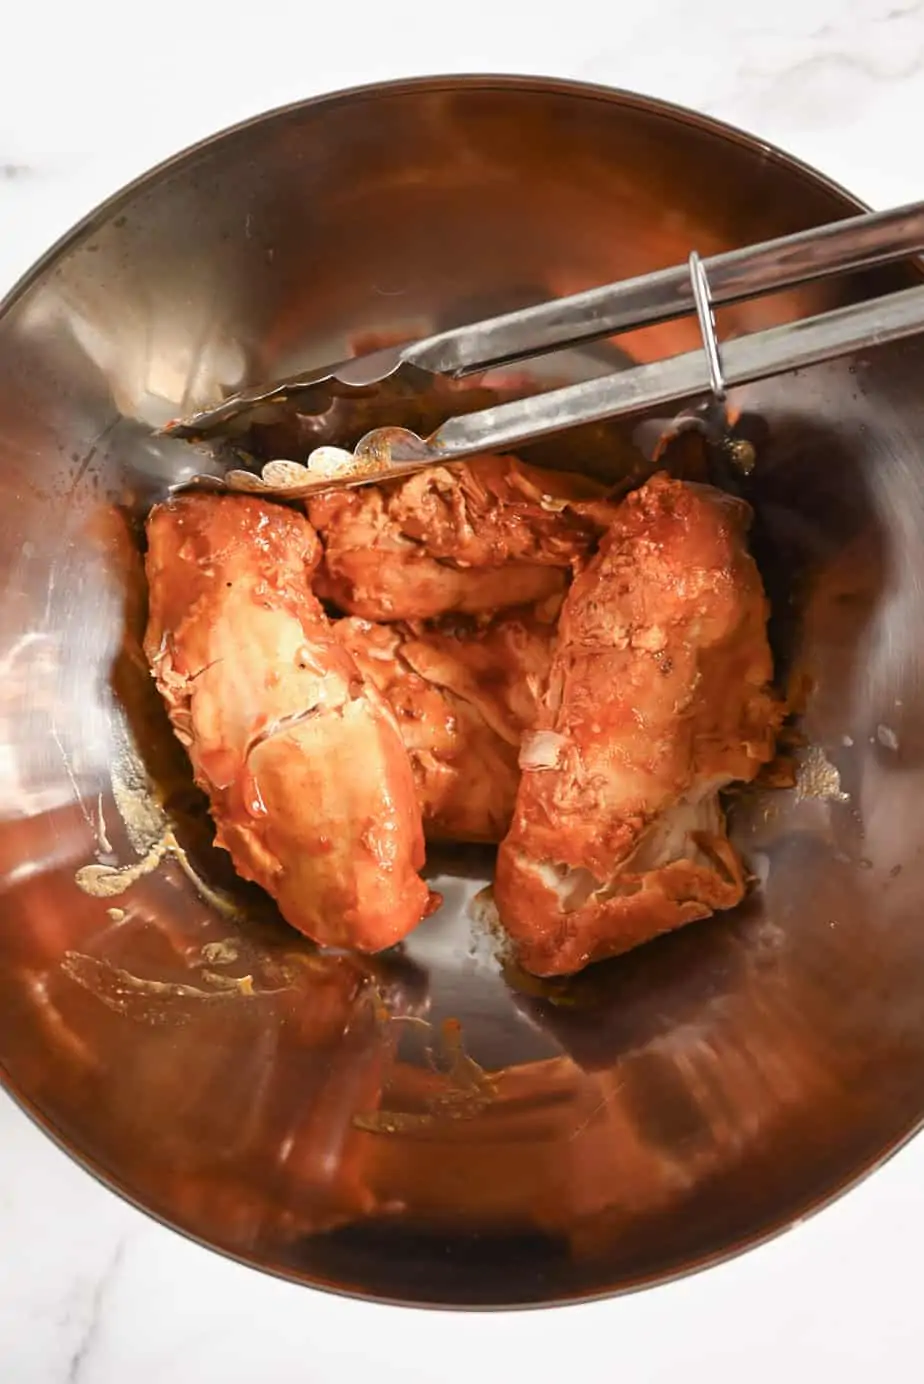 Slow cooked barbecue chicken breasts in a metal bowl with metal tongs.